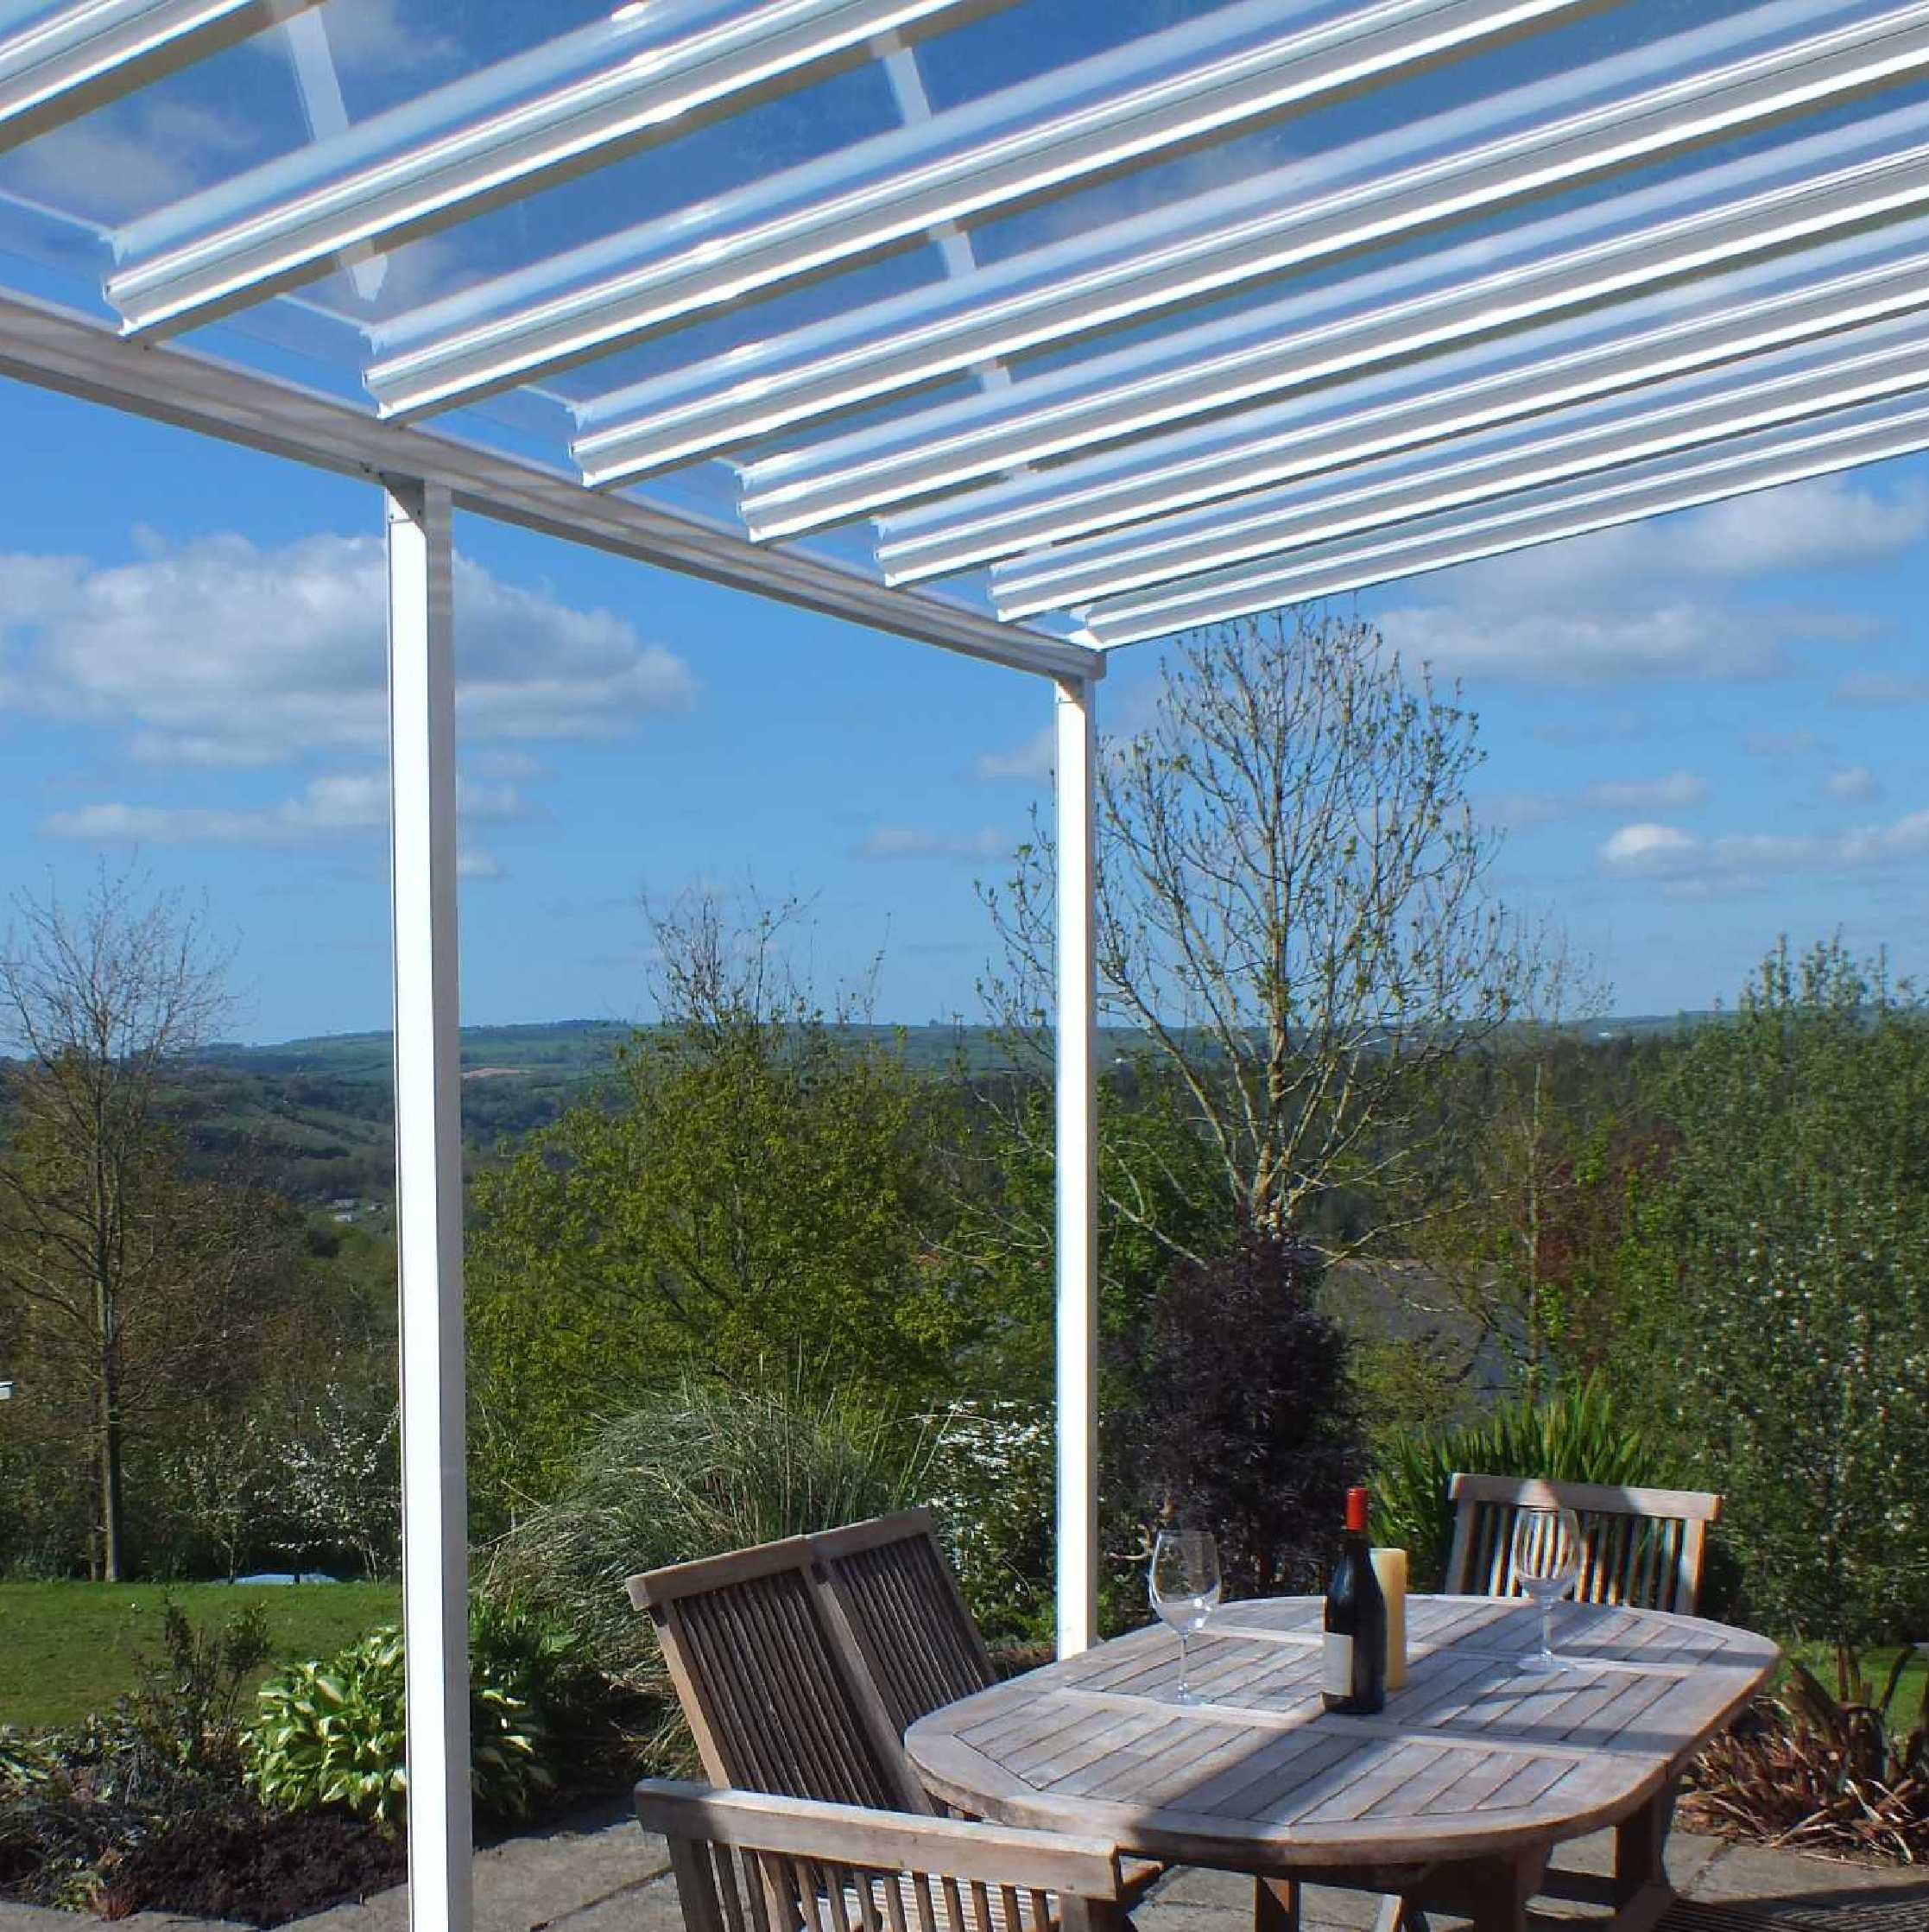 Buy Omega Smart Lean-To Canopy, White UNGLAZED for 6mm Glazing - 10.5m (W) x 2.5m (P), (5) Supporting Posts online today